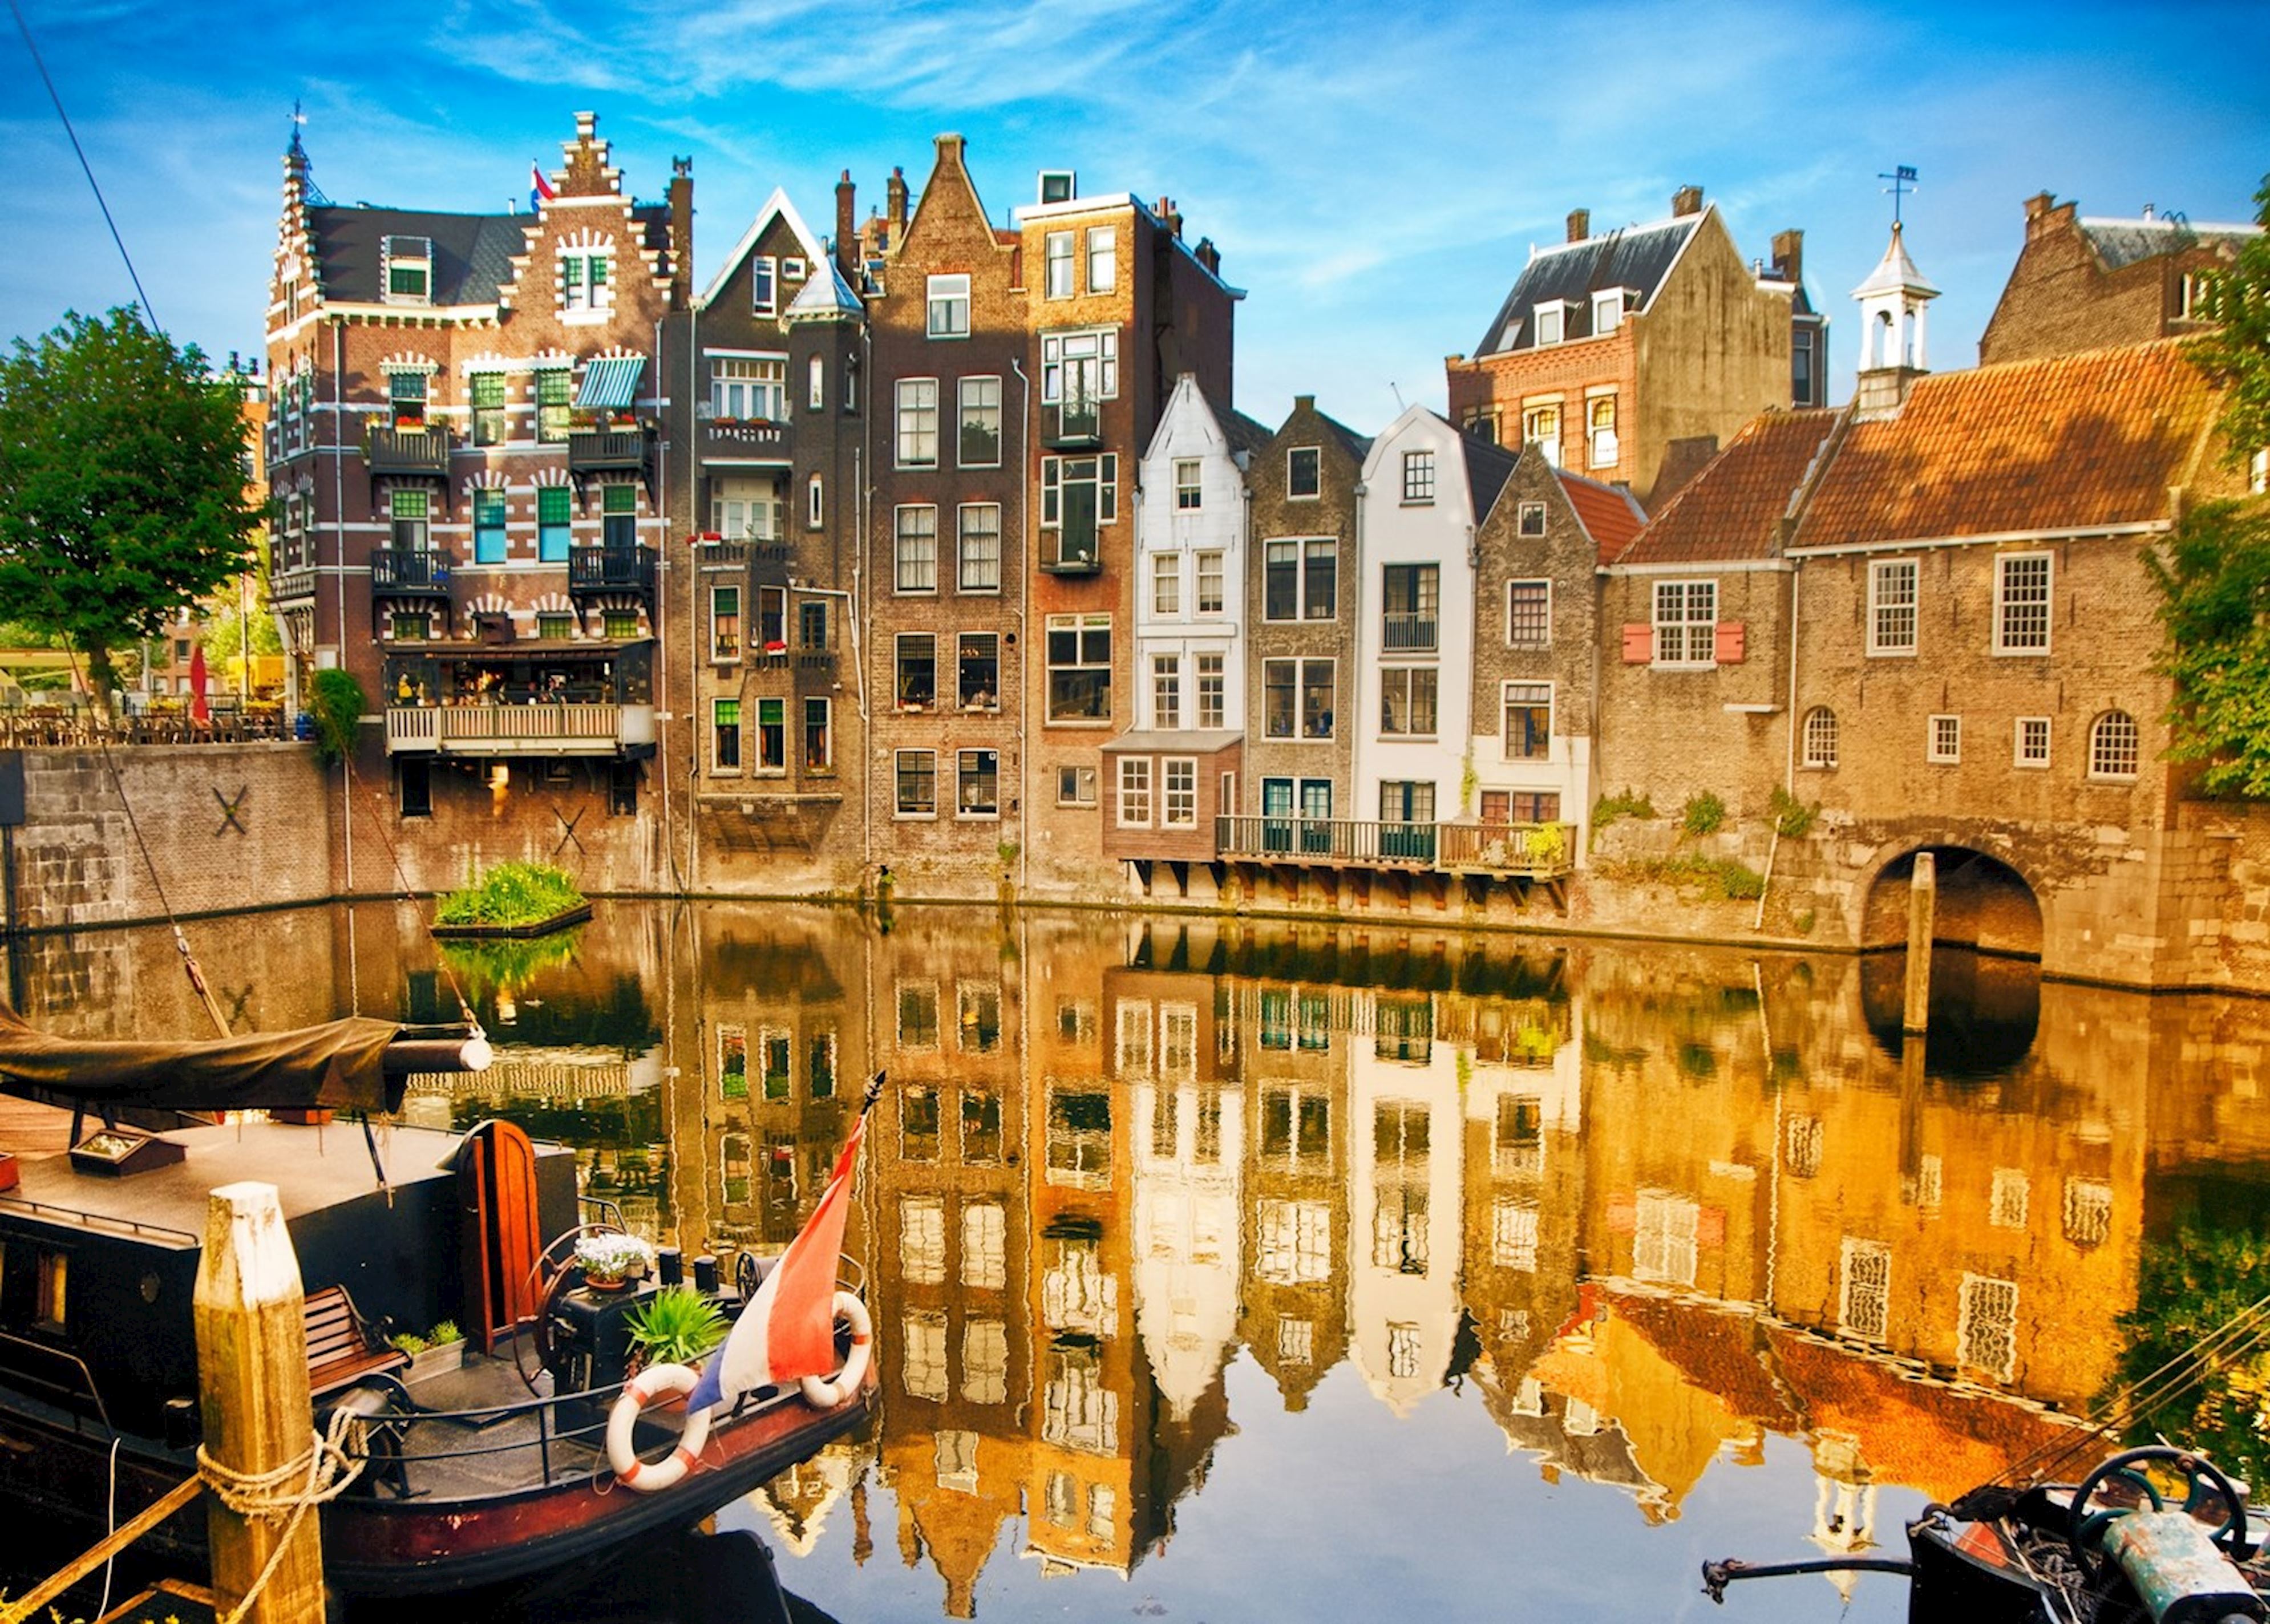 Visit Rotterdam on a trip to The Netherlands | Audley Travel